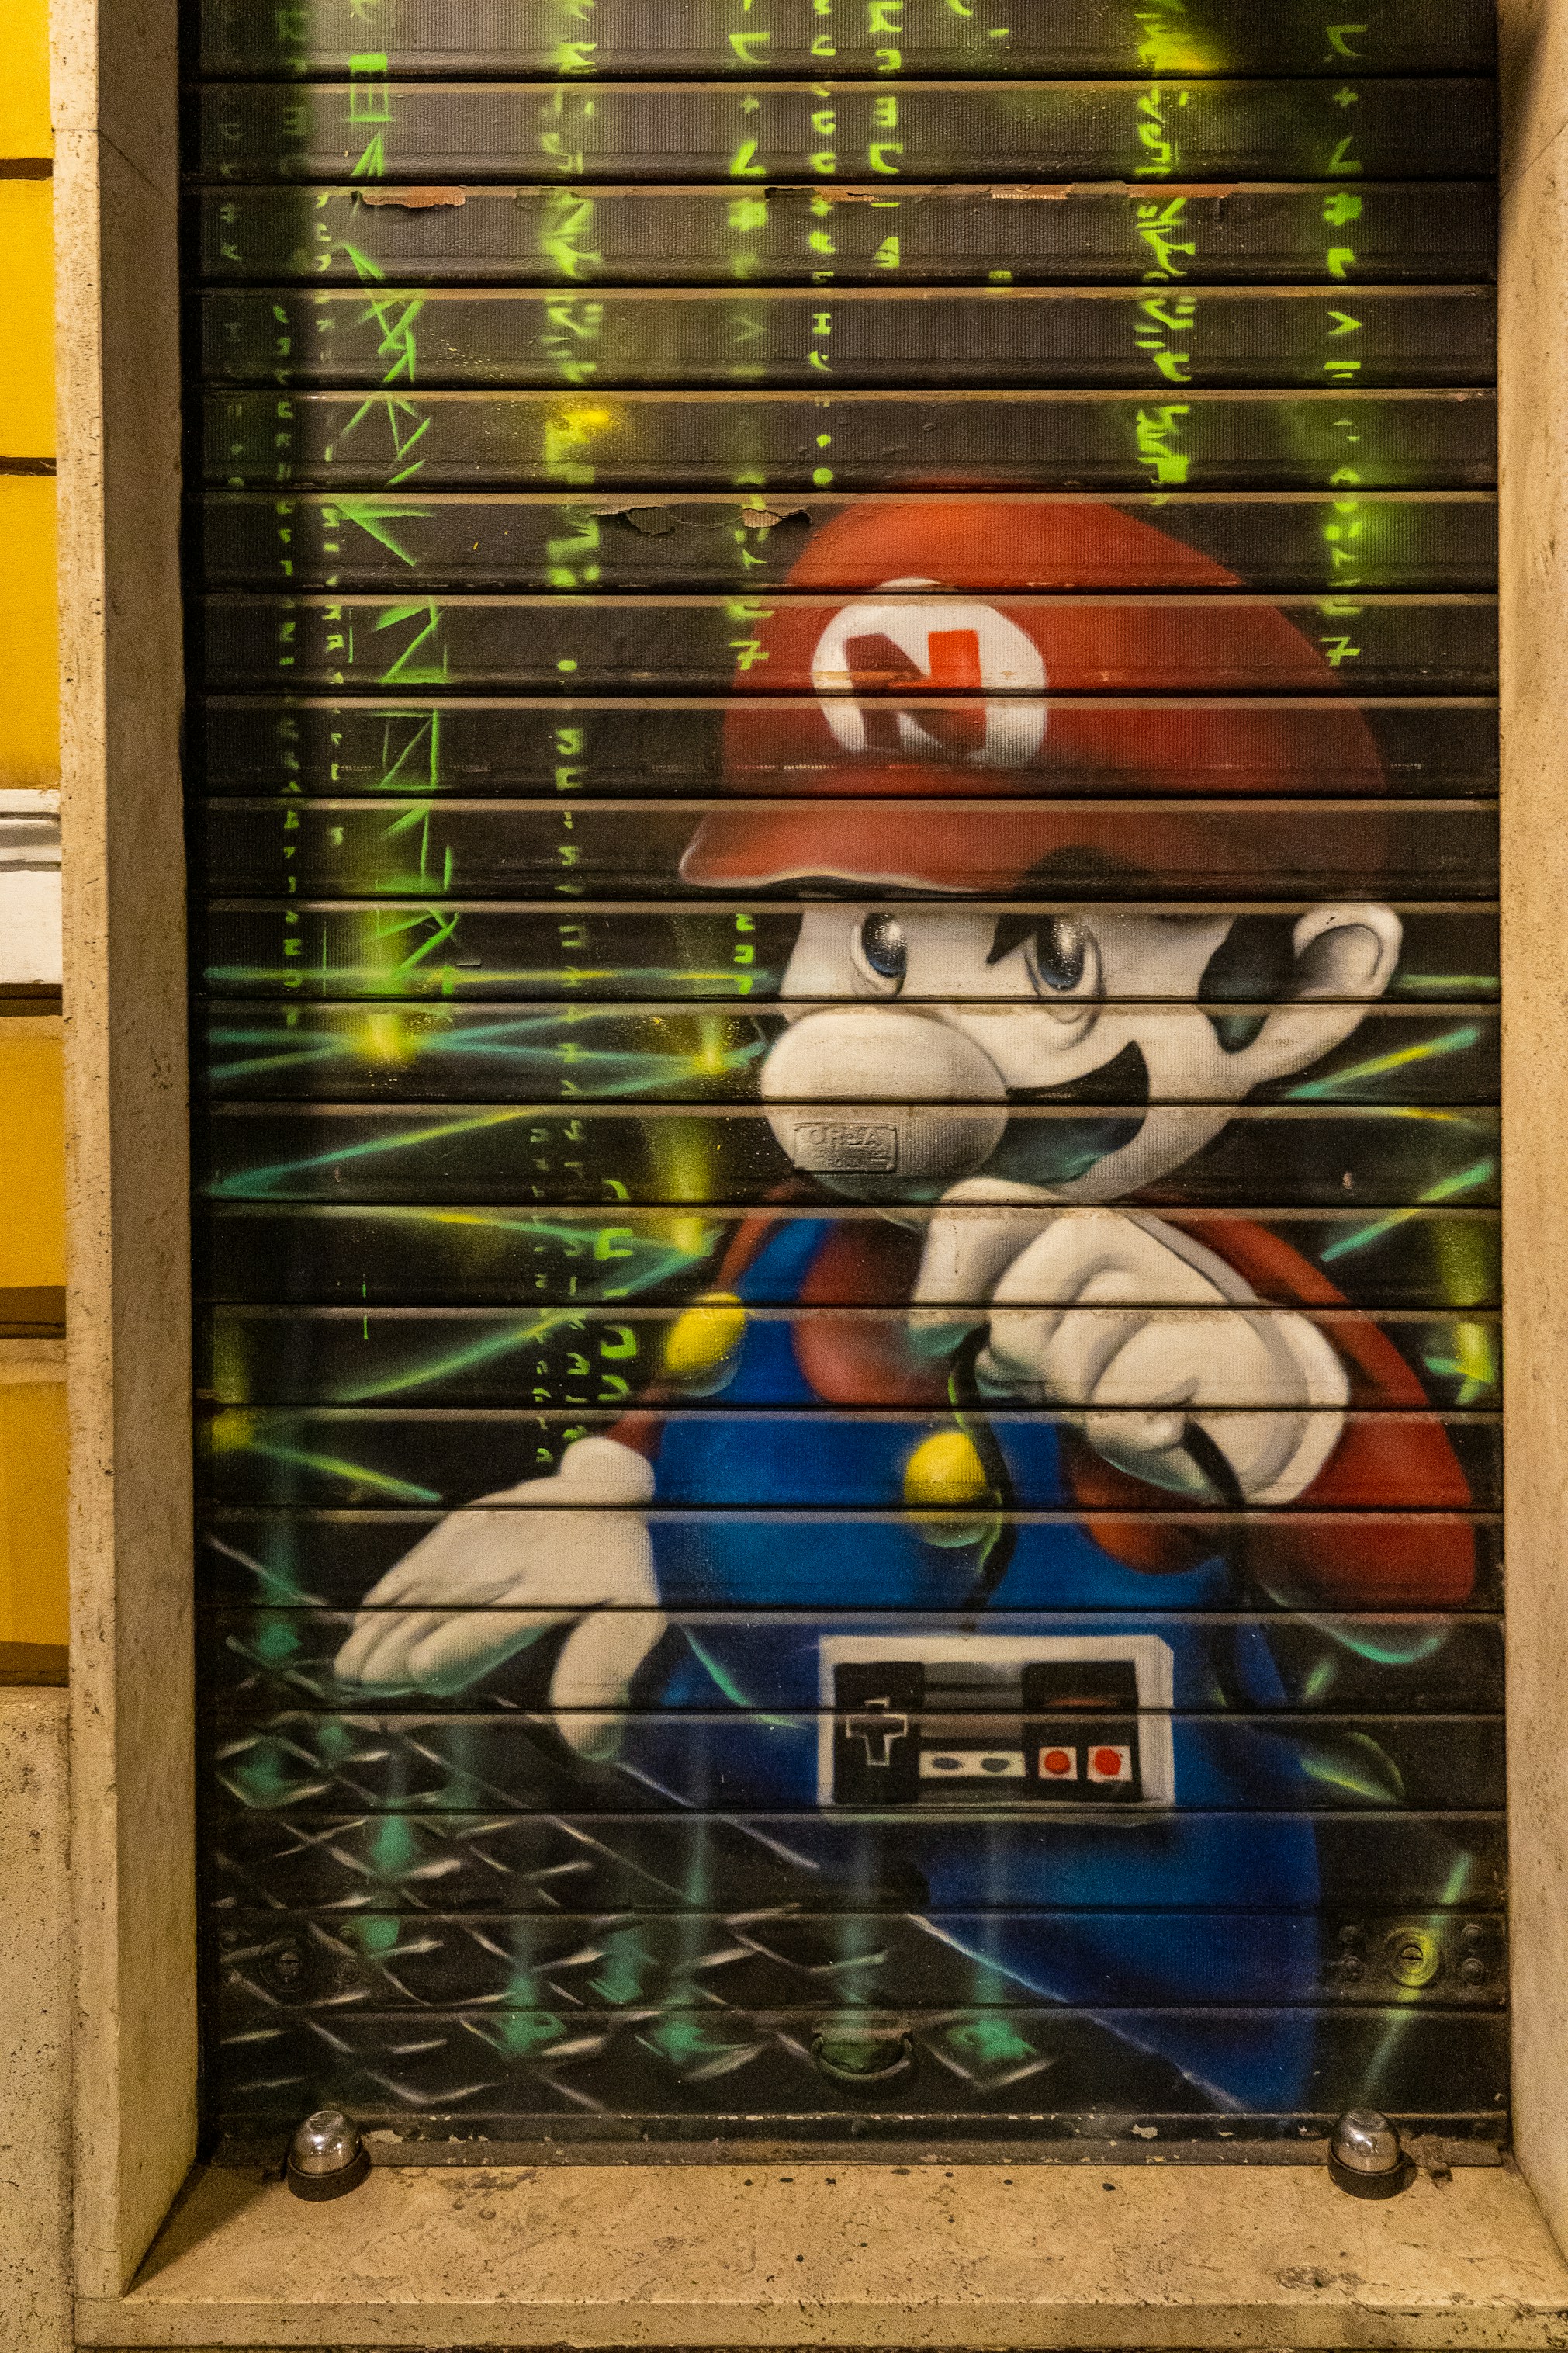 Mario, one of the characters from Super Mario, painted on a shop door shutter.